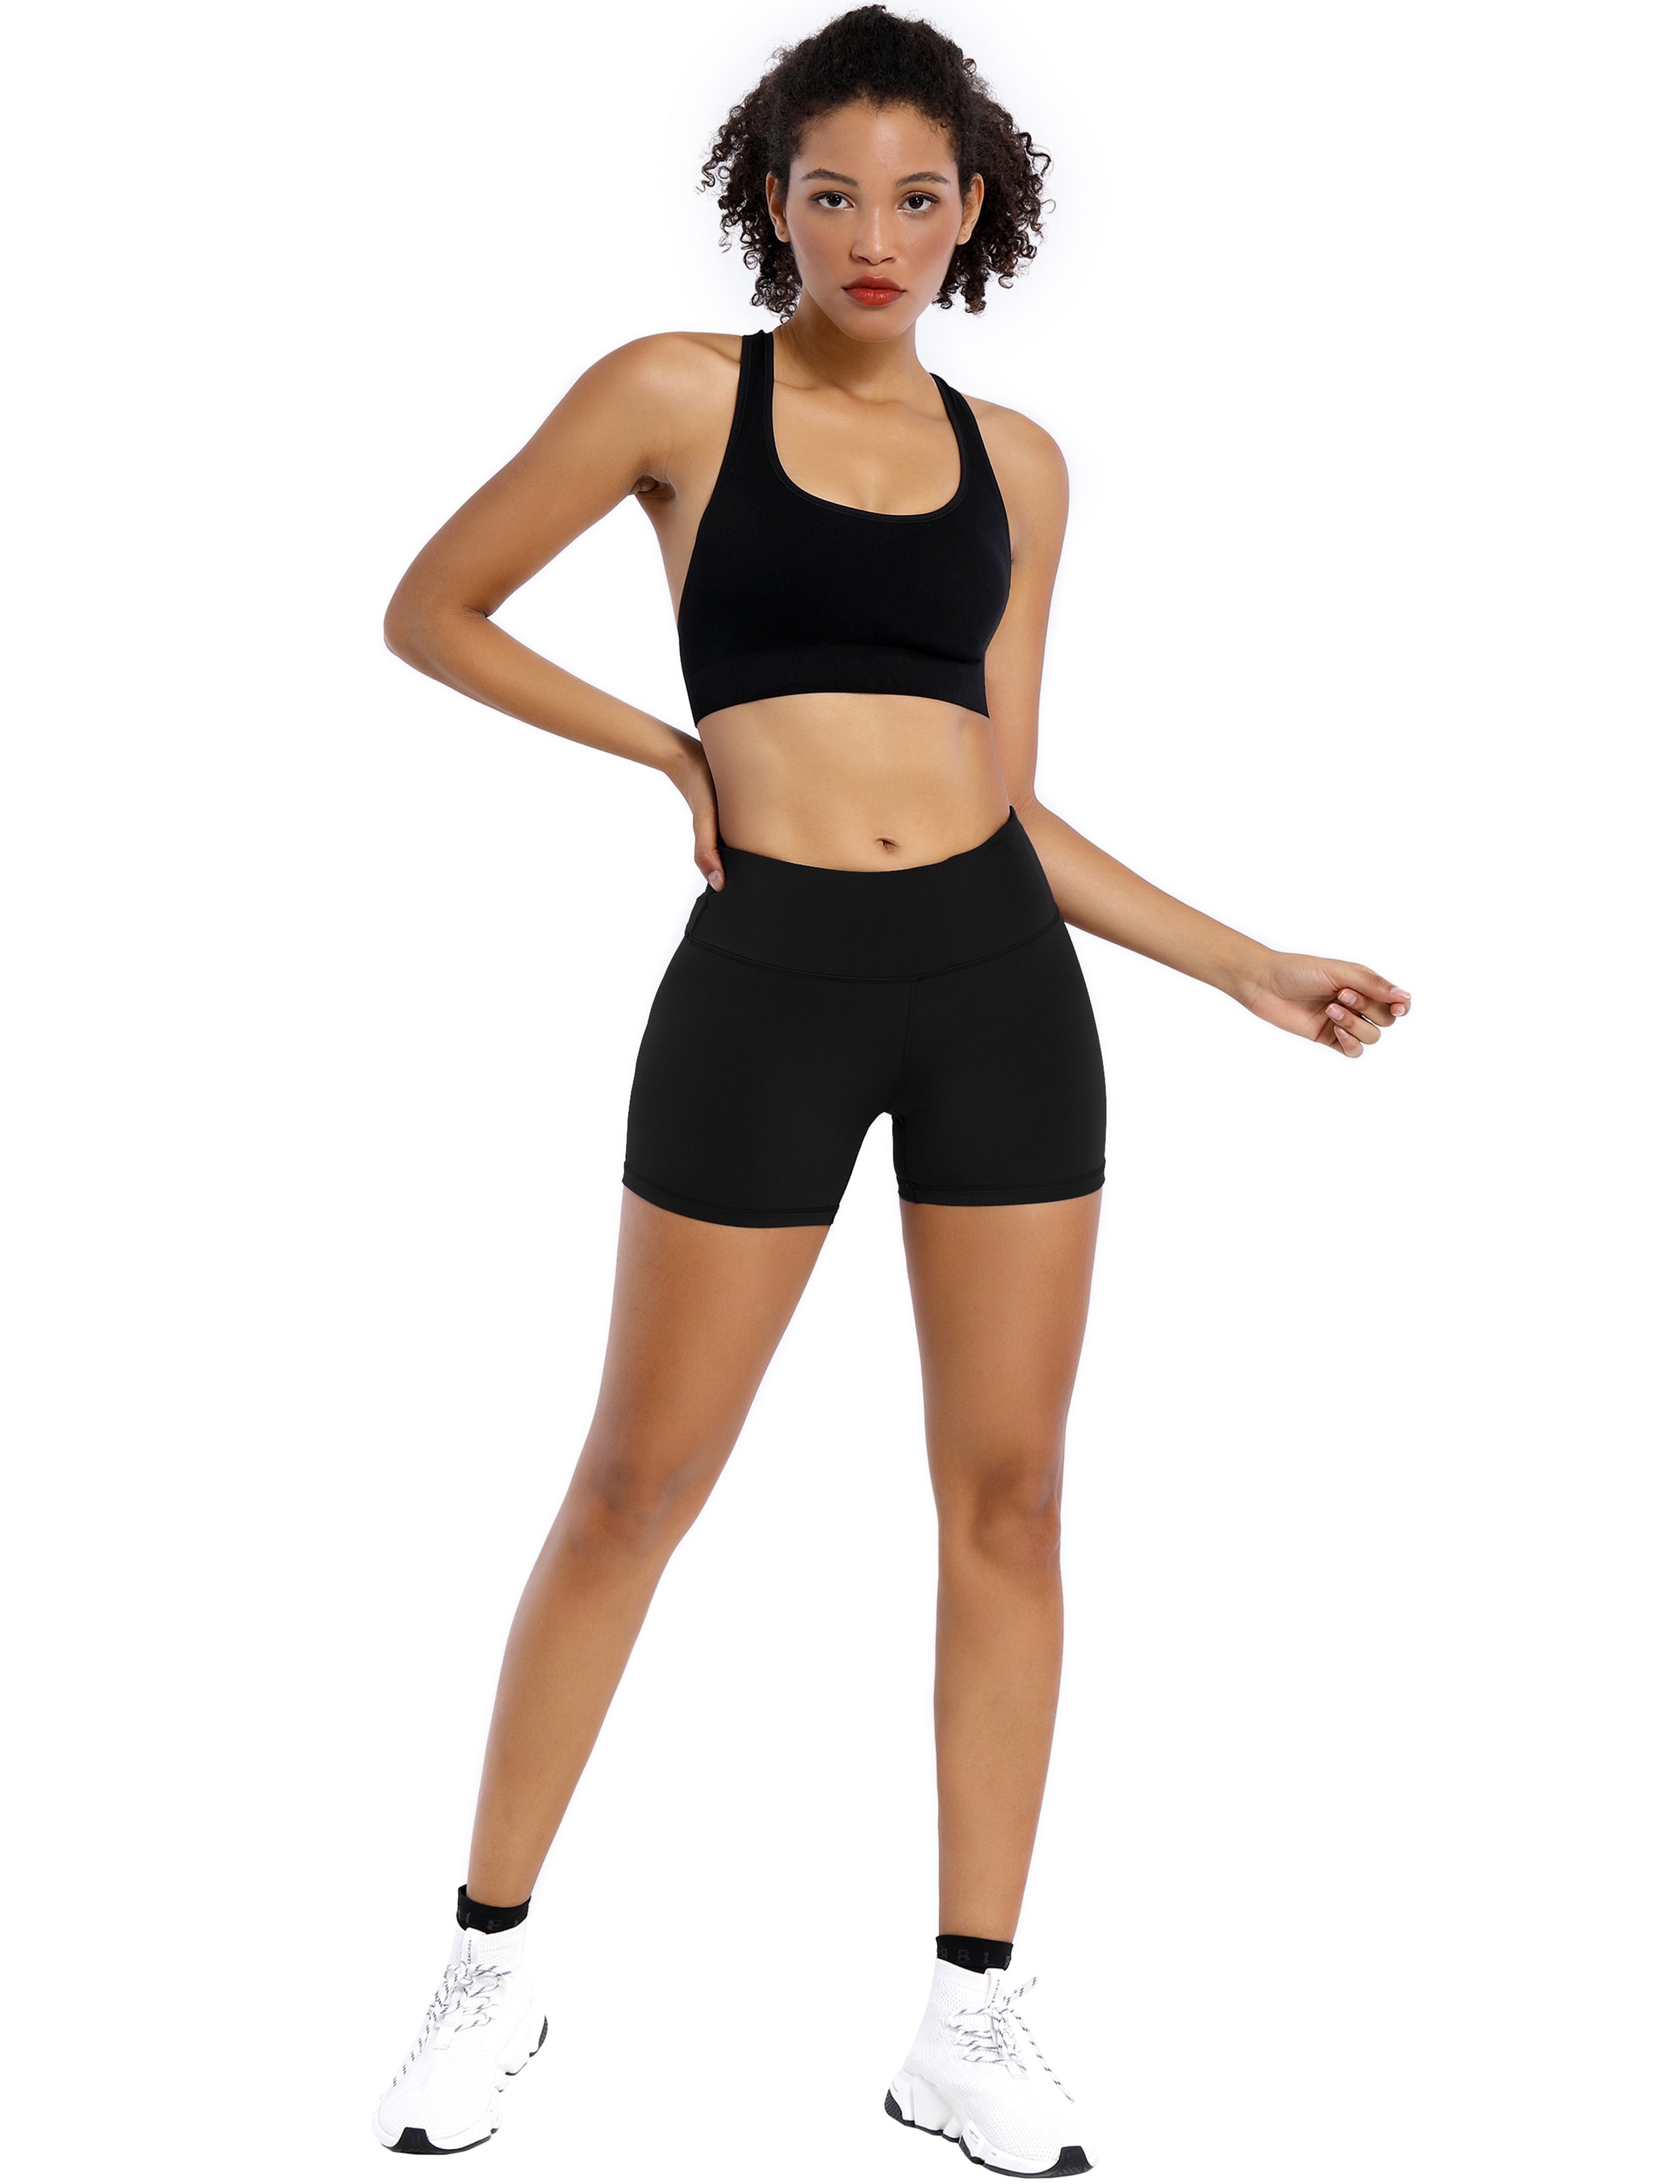 4" Golf Shorts black Sleek, soft, smooth and totally comfortable: our newest style is here. Softest-ever fabric High elasticity High density 4-way stretch Fabric doesn't attract lint easily No see-through Moisture-wicking Machine wash 75% Nylon, 25% Spandex